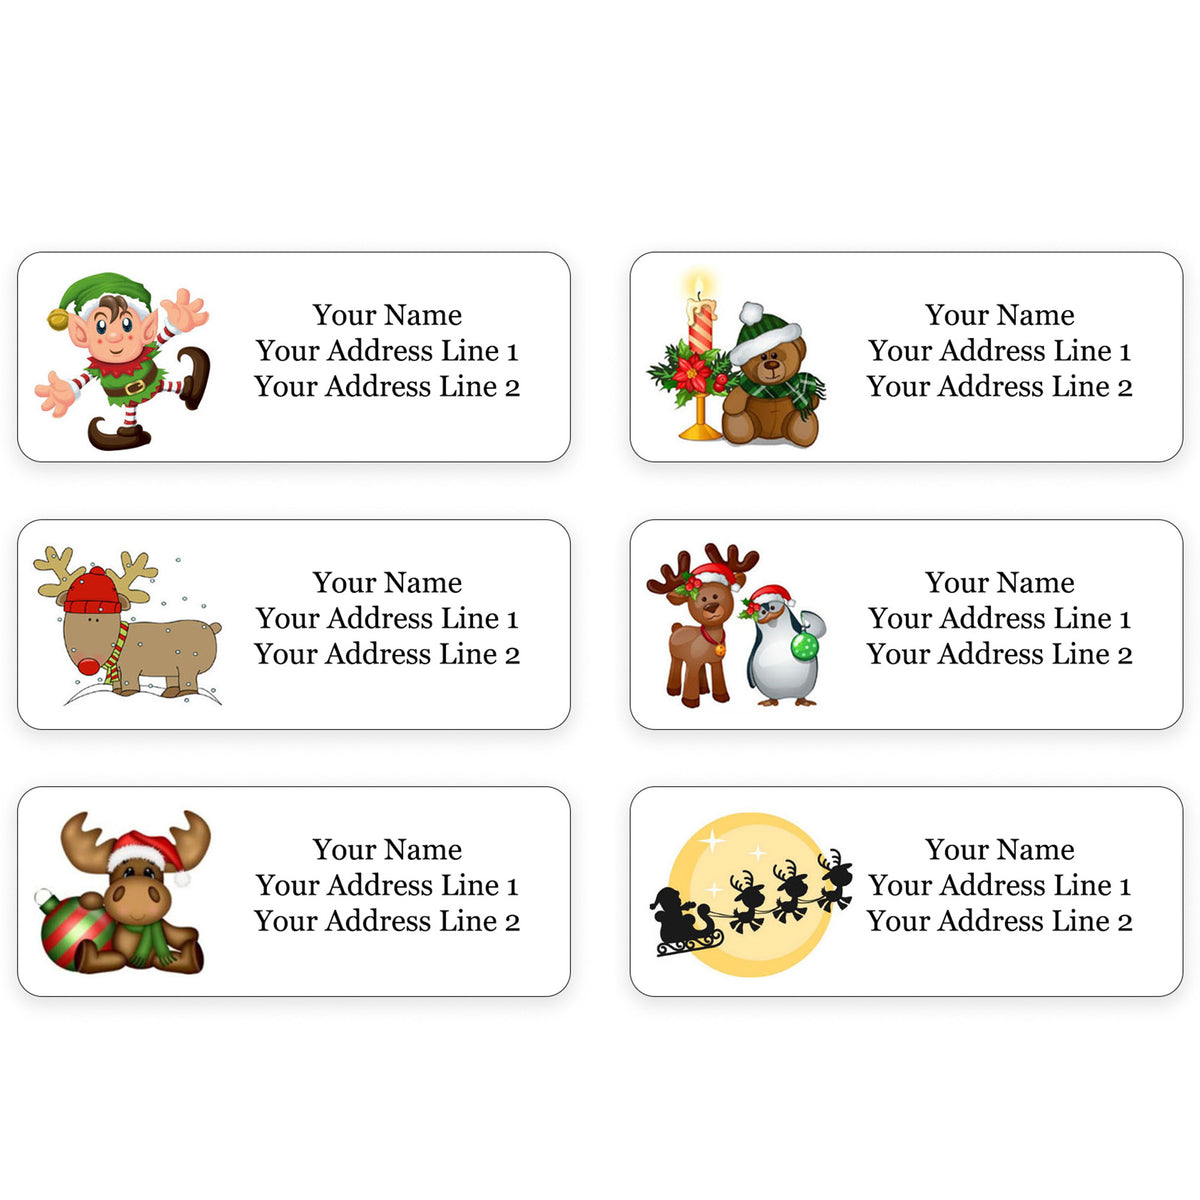 Personalized Christmas Theme Return Address Labels for Holiday Envelopes